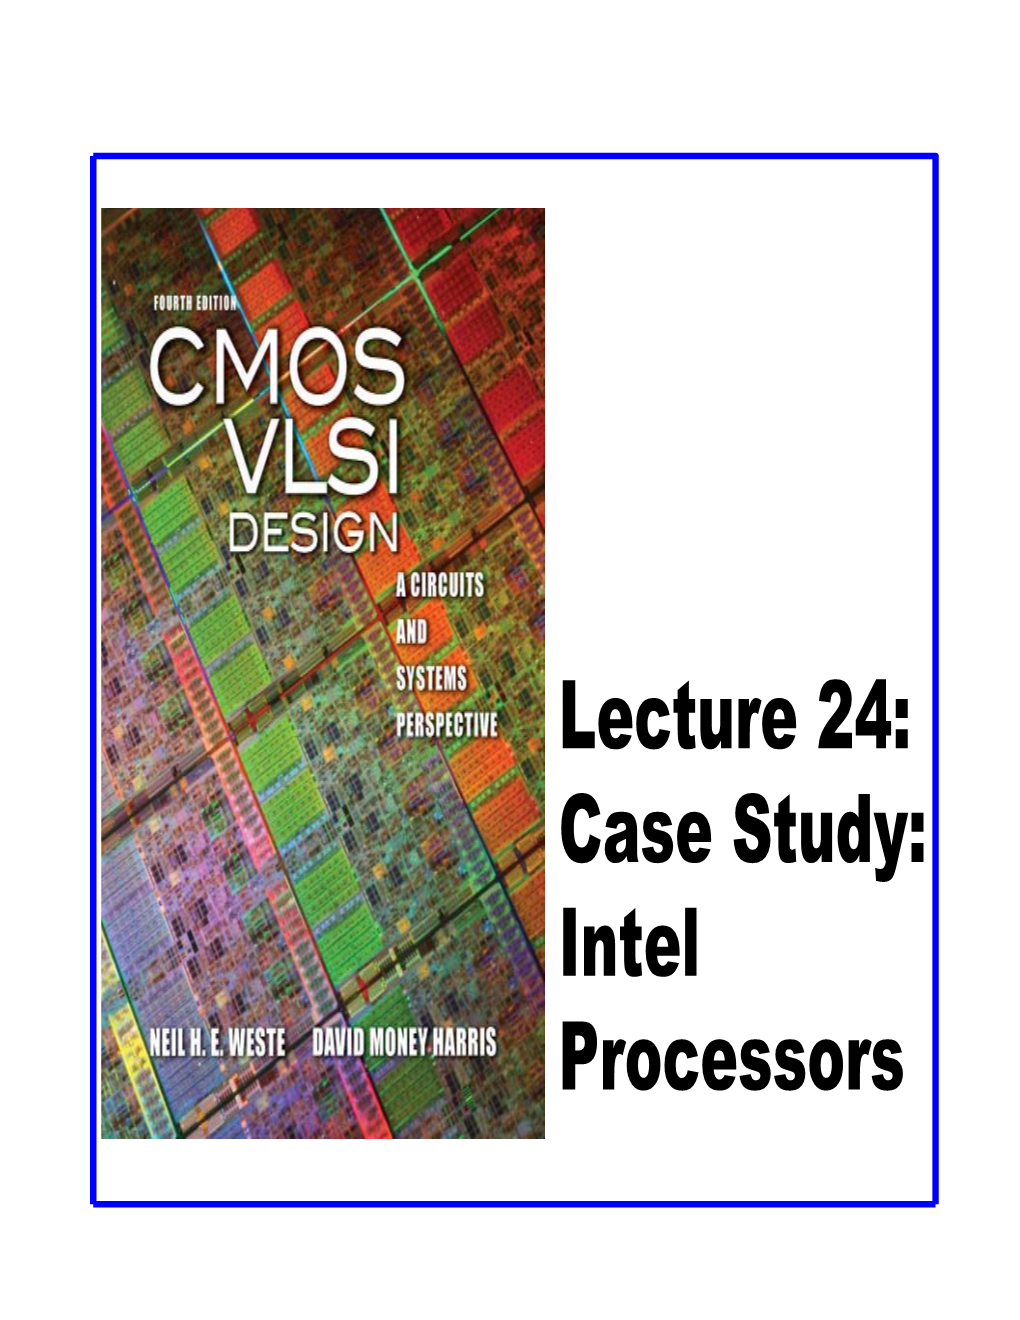 Lecture 24: Case Study: Intel Processors Outline